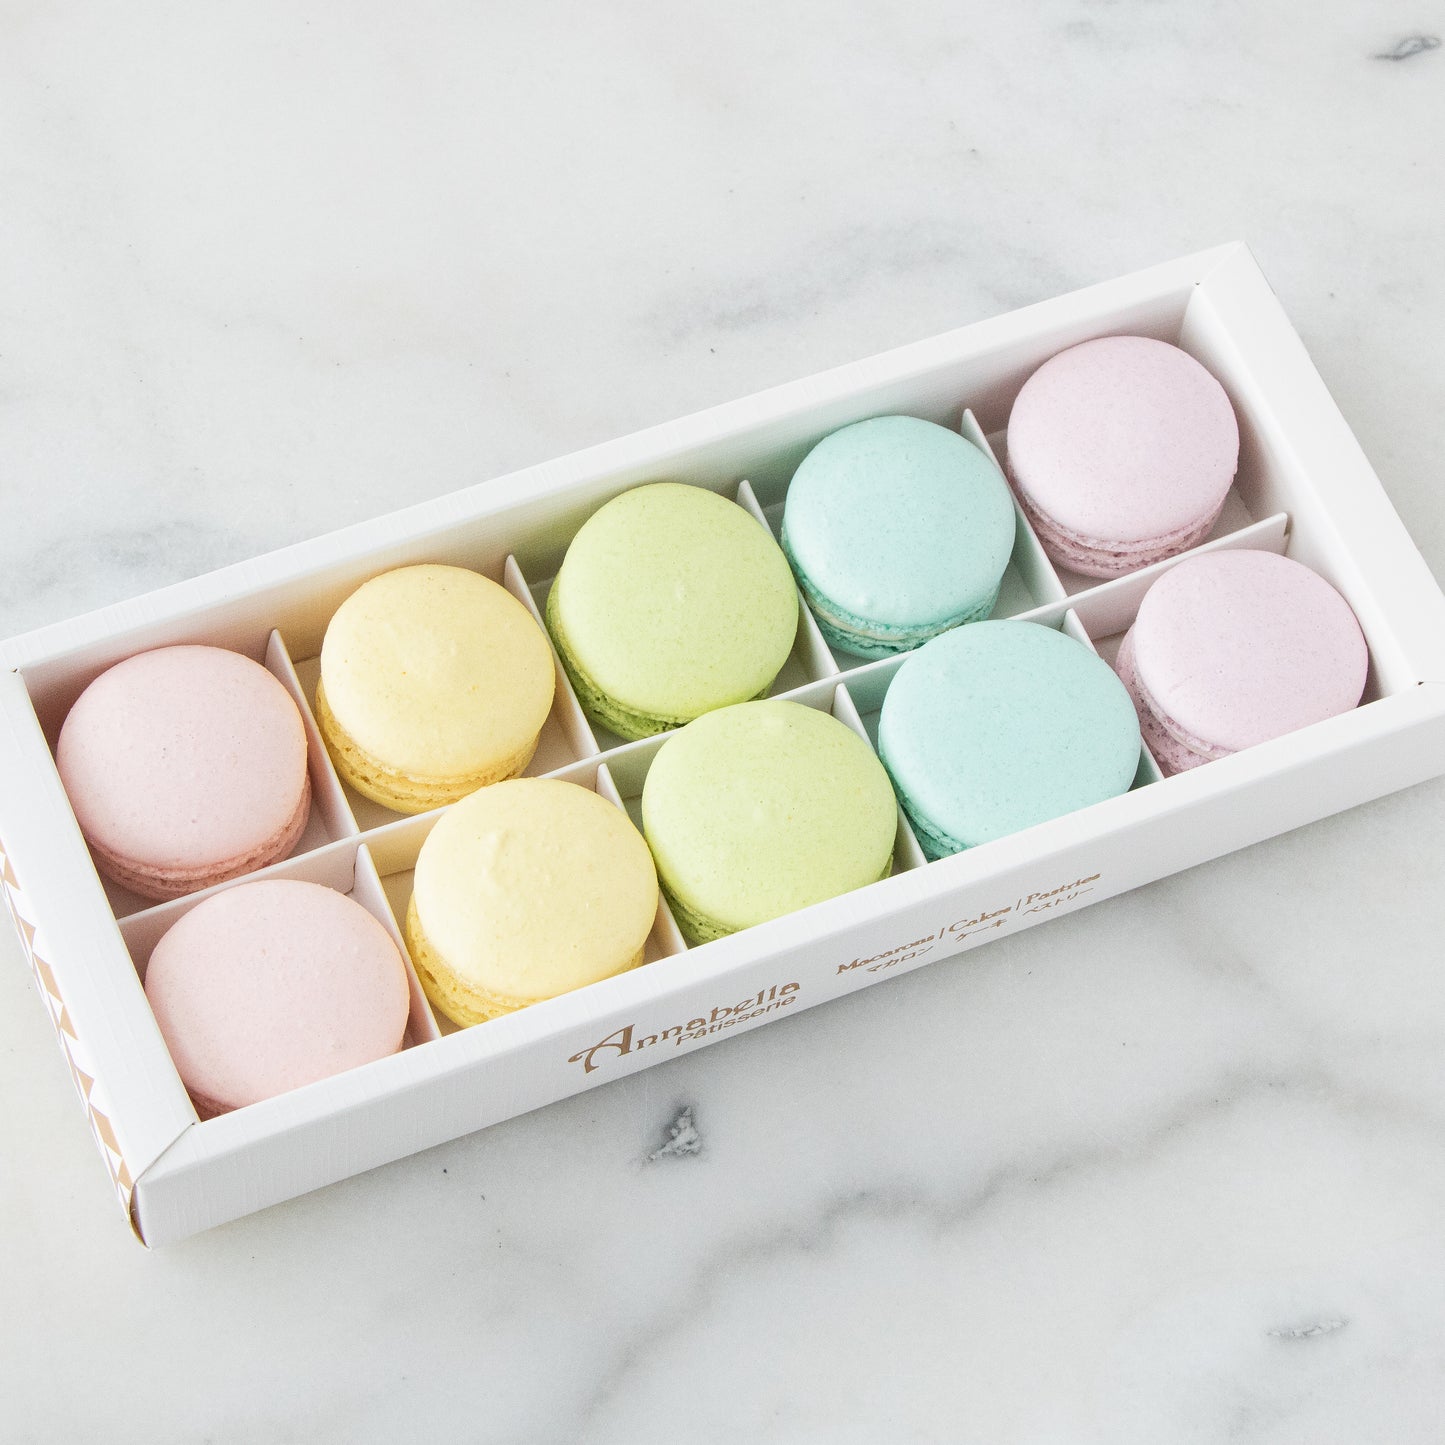 10pcs Classic Macarons (Classic1) in Gift Box and Paper Bag | Perfect Gift Choice